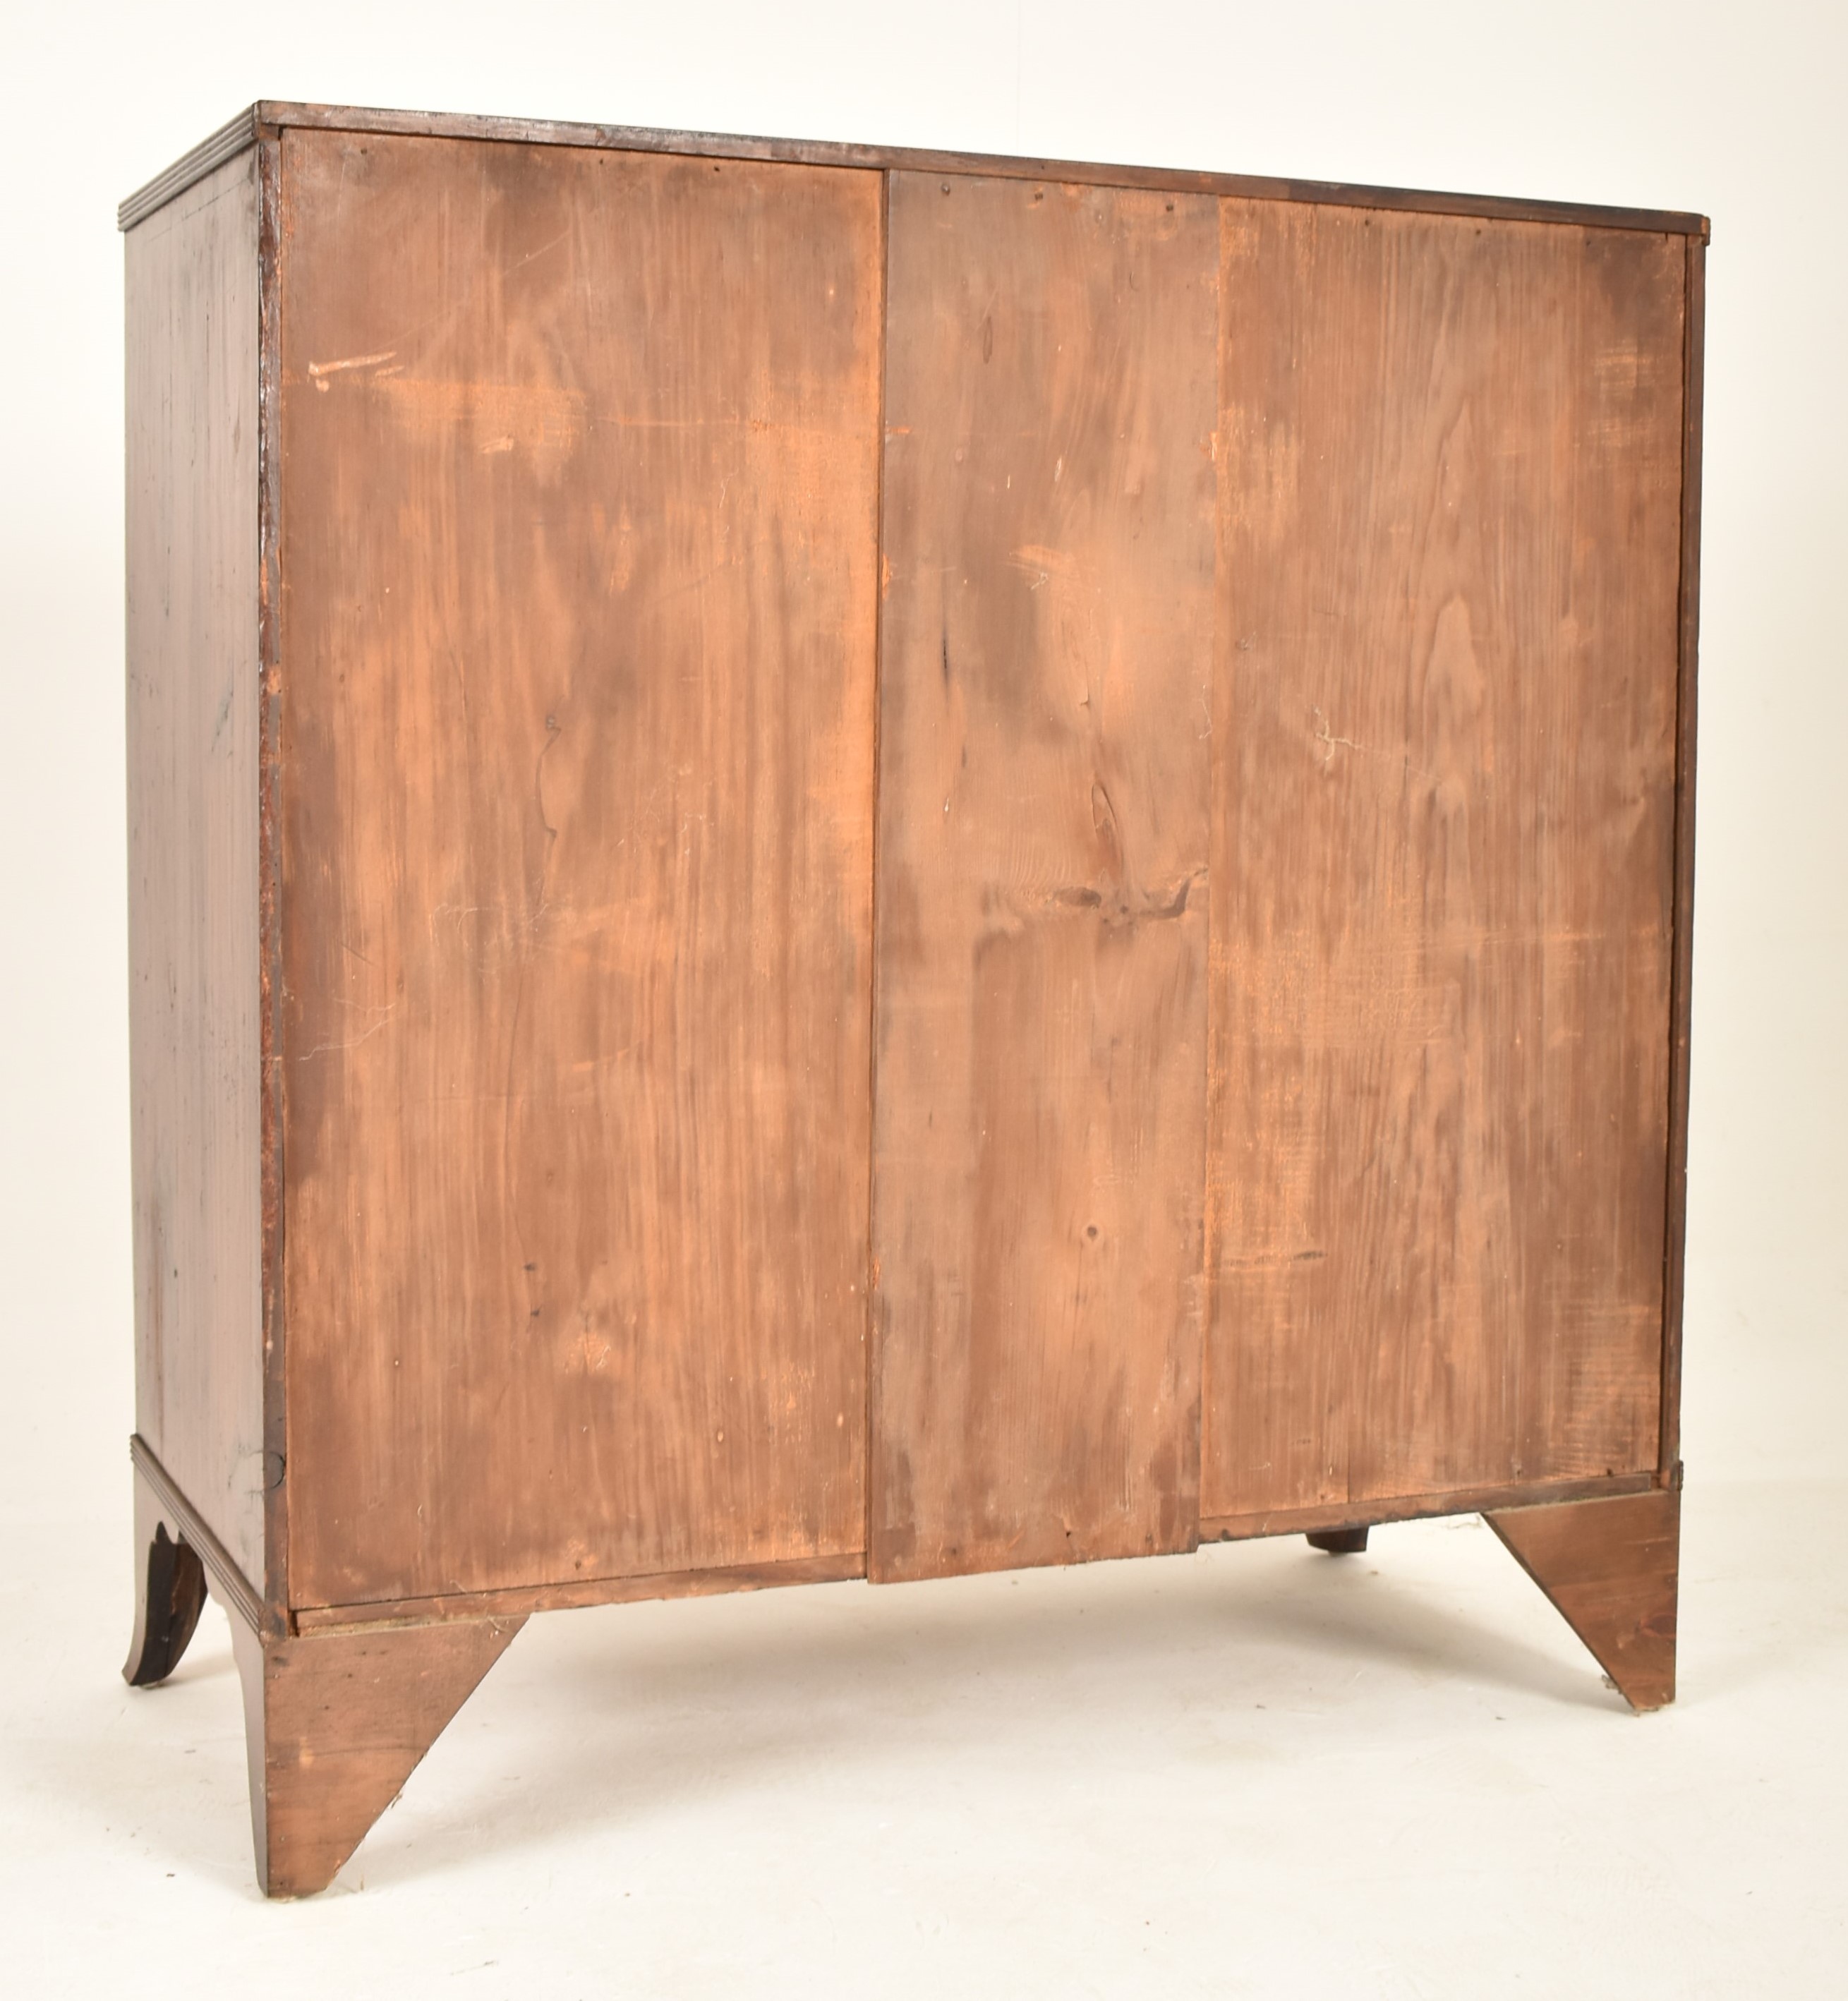 19TH CENTURY GEORGE III FLAME MAHOGANY CHEST OF DRAWERS - Image 6 of 6